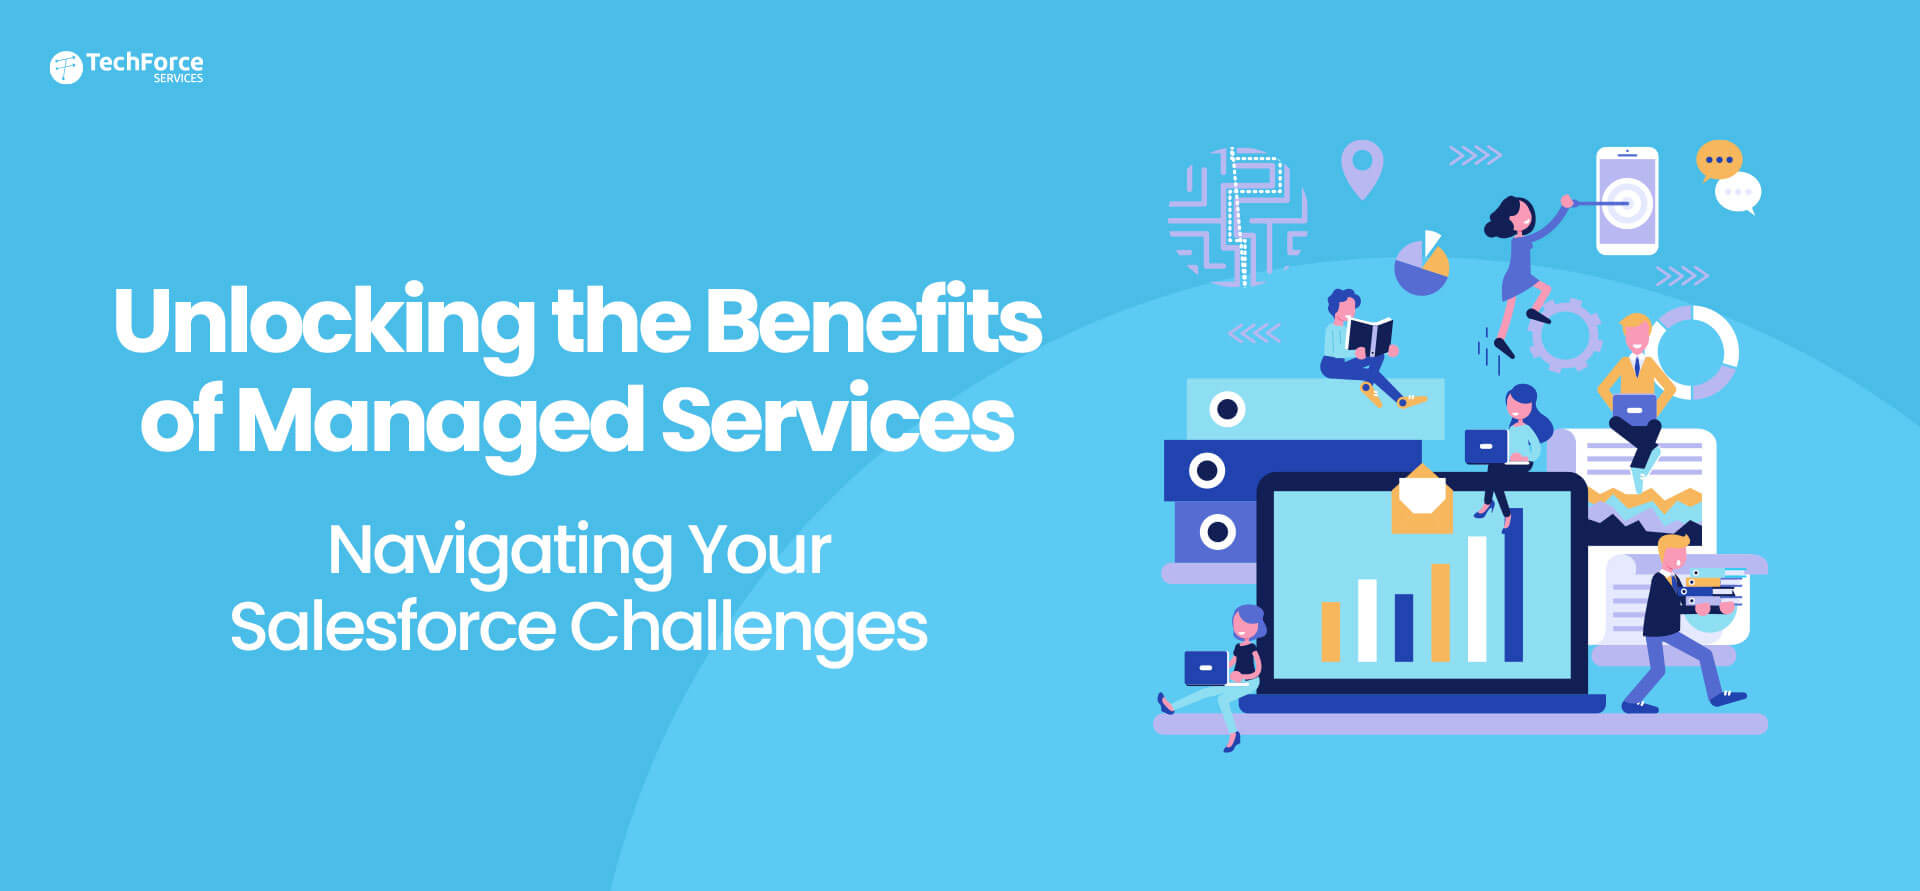 Unlocking-the-Benefits-of-Managed-Services